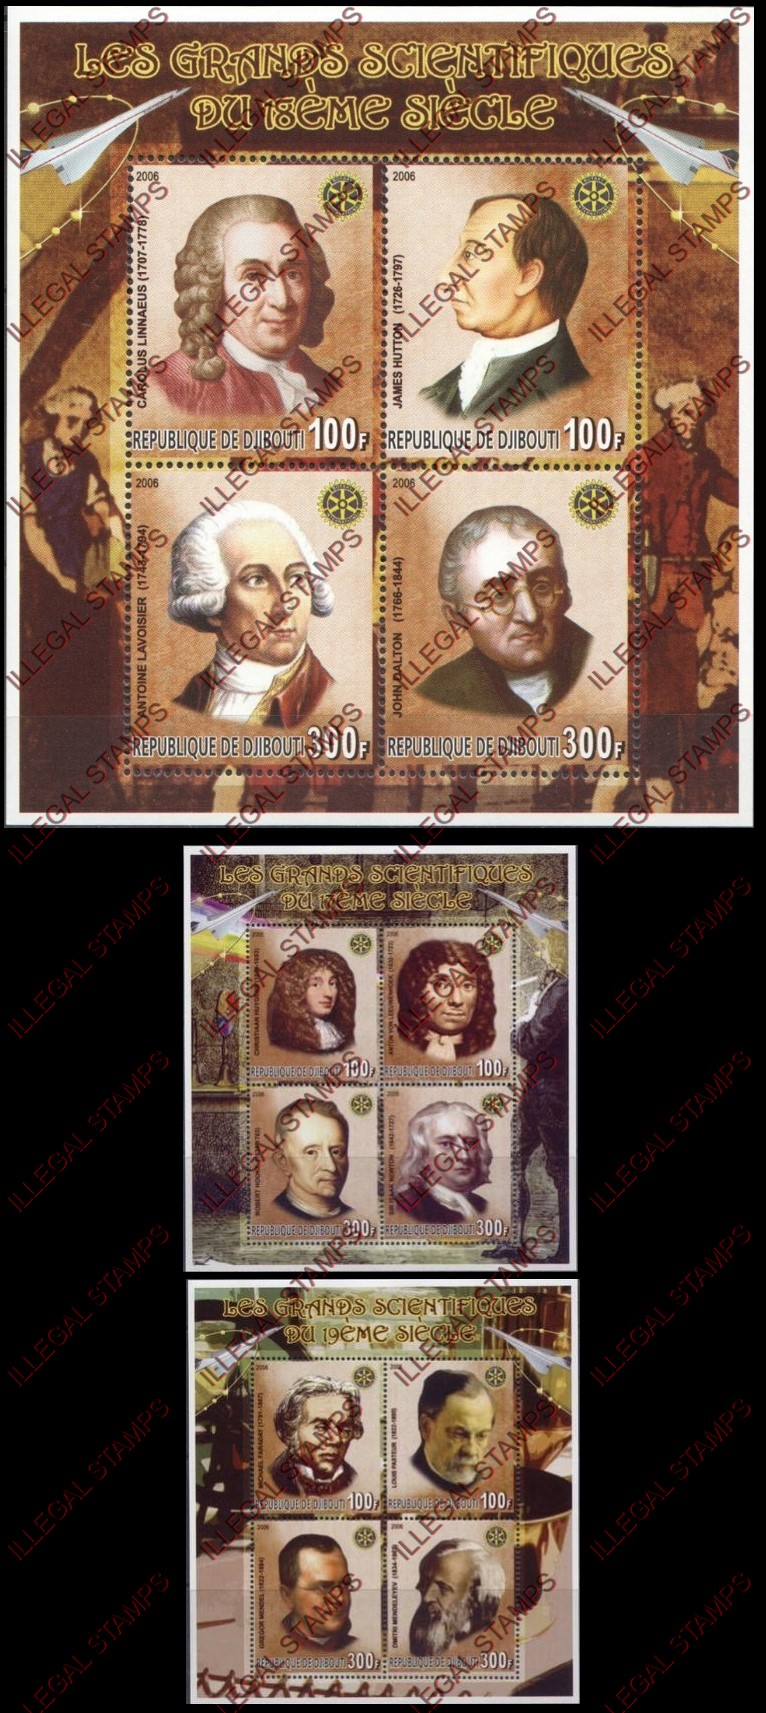 Djibouti 2006 Scientists Illegal Stamp Souvenir Sheets of 4